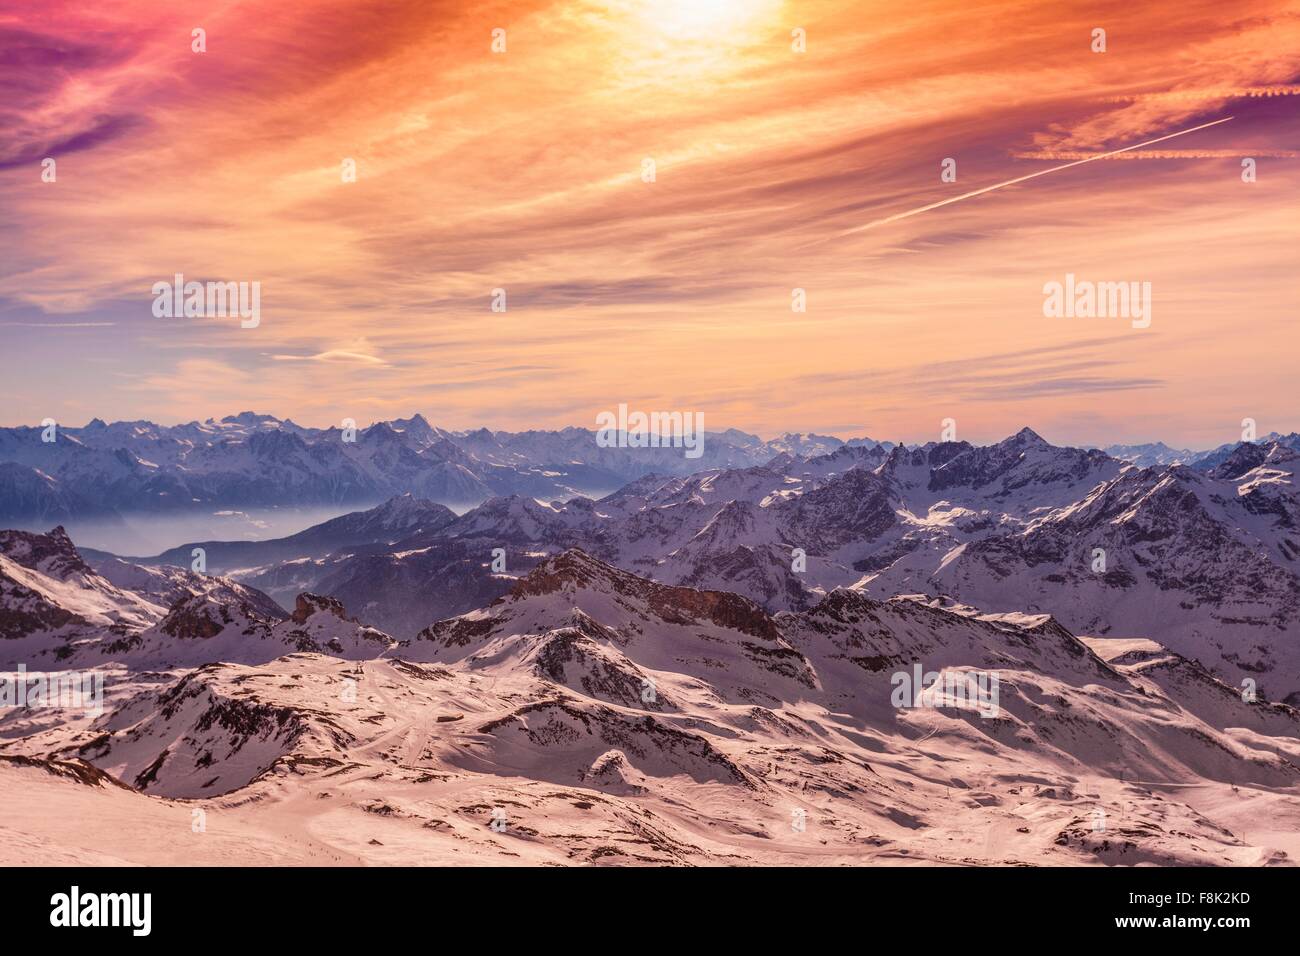 Sunset over snow covered mountains, Cervinia, Italy Stock Photo